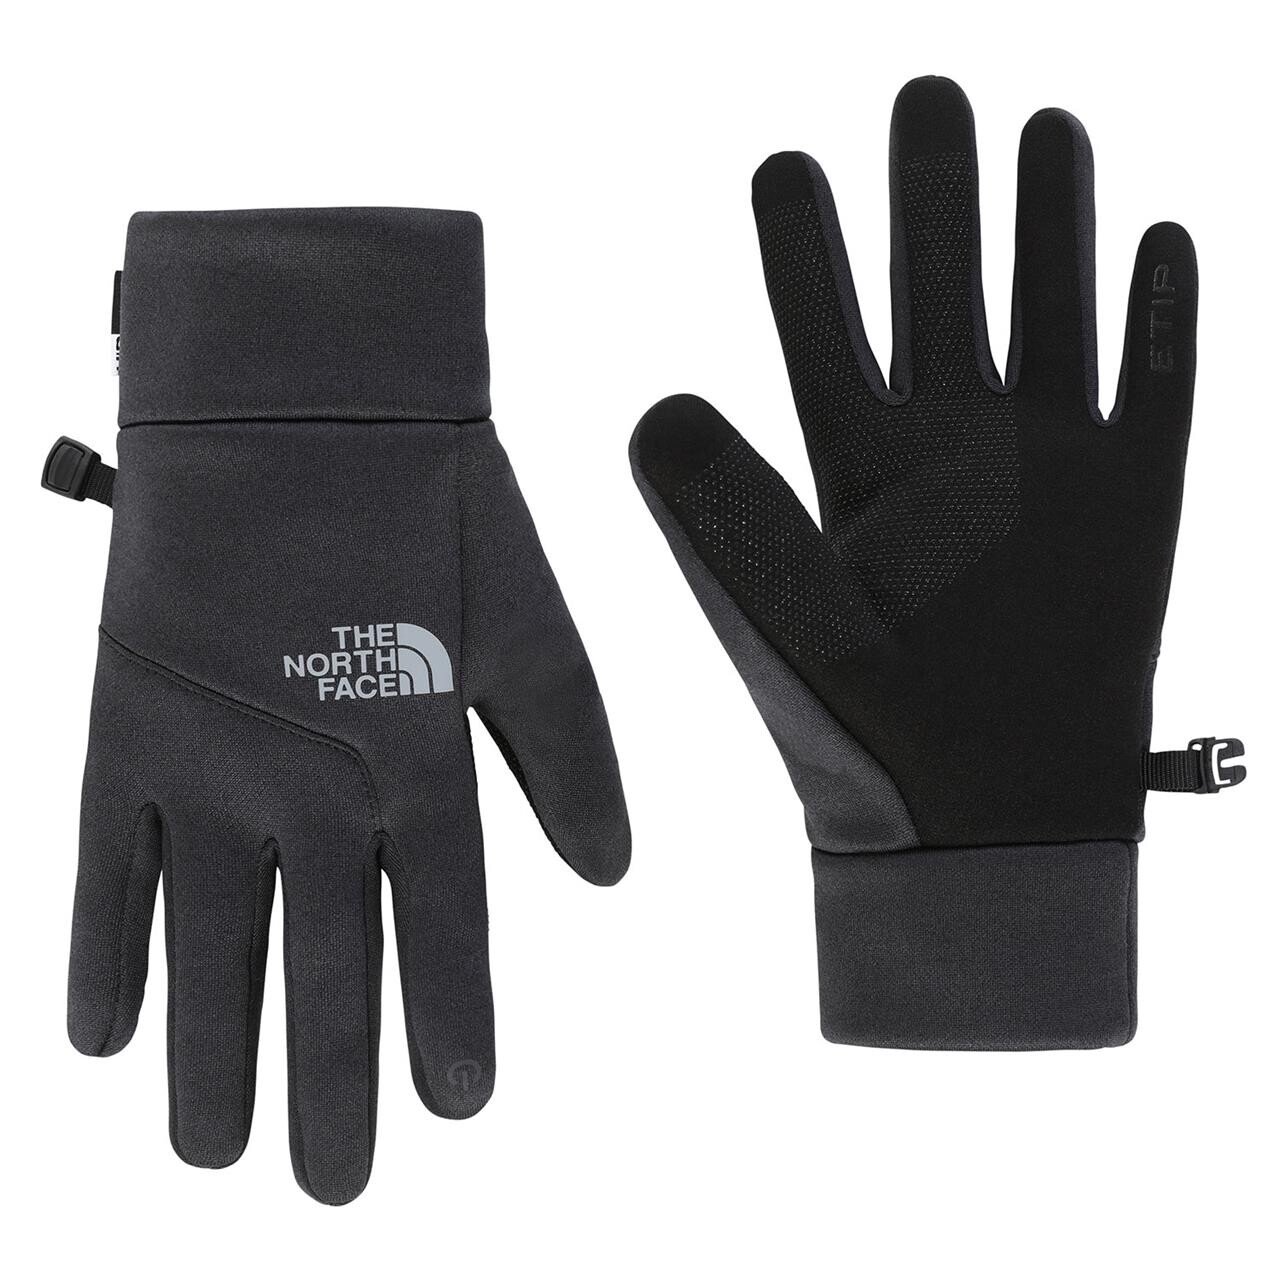 The North Face Womens Etip Hardface Glove (Sort (TNF BLACK HEATHER) Small)